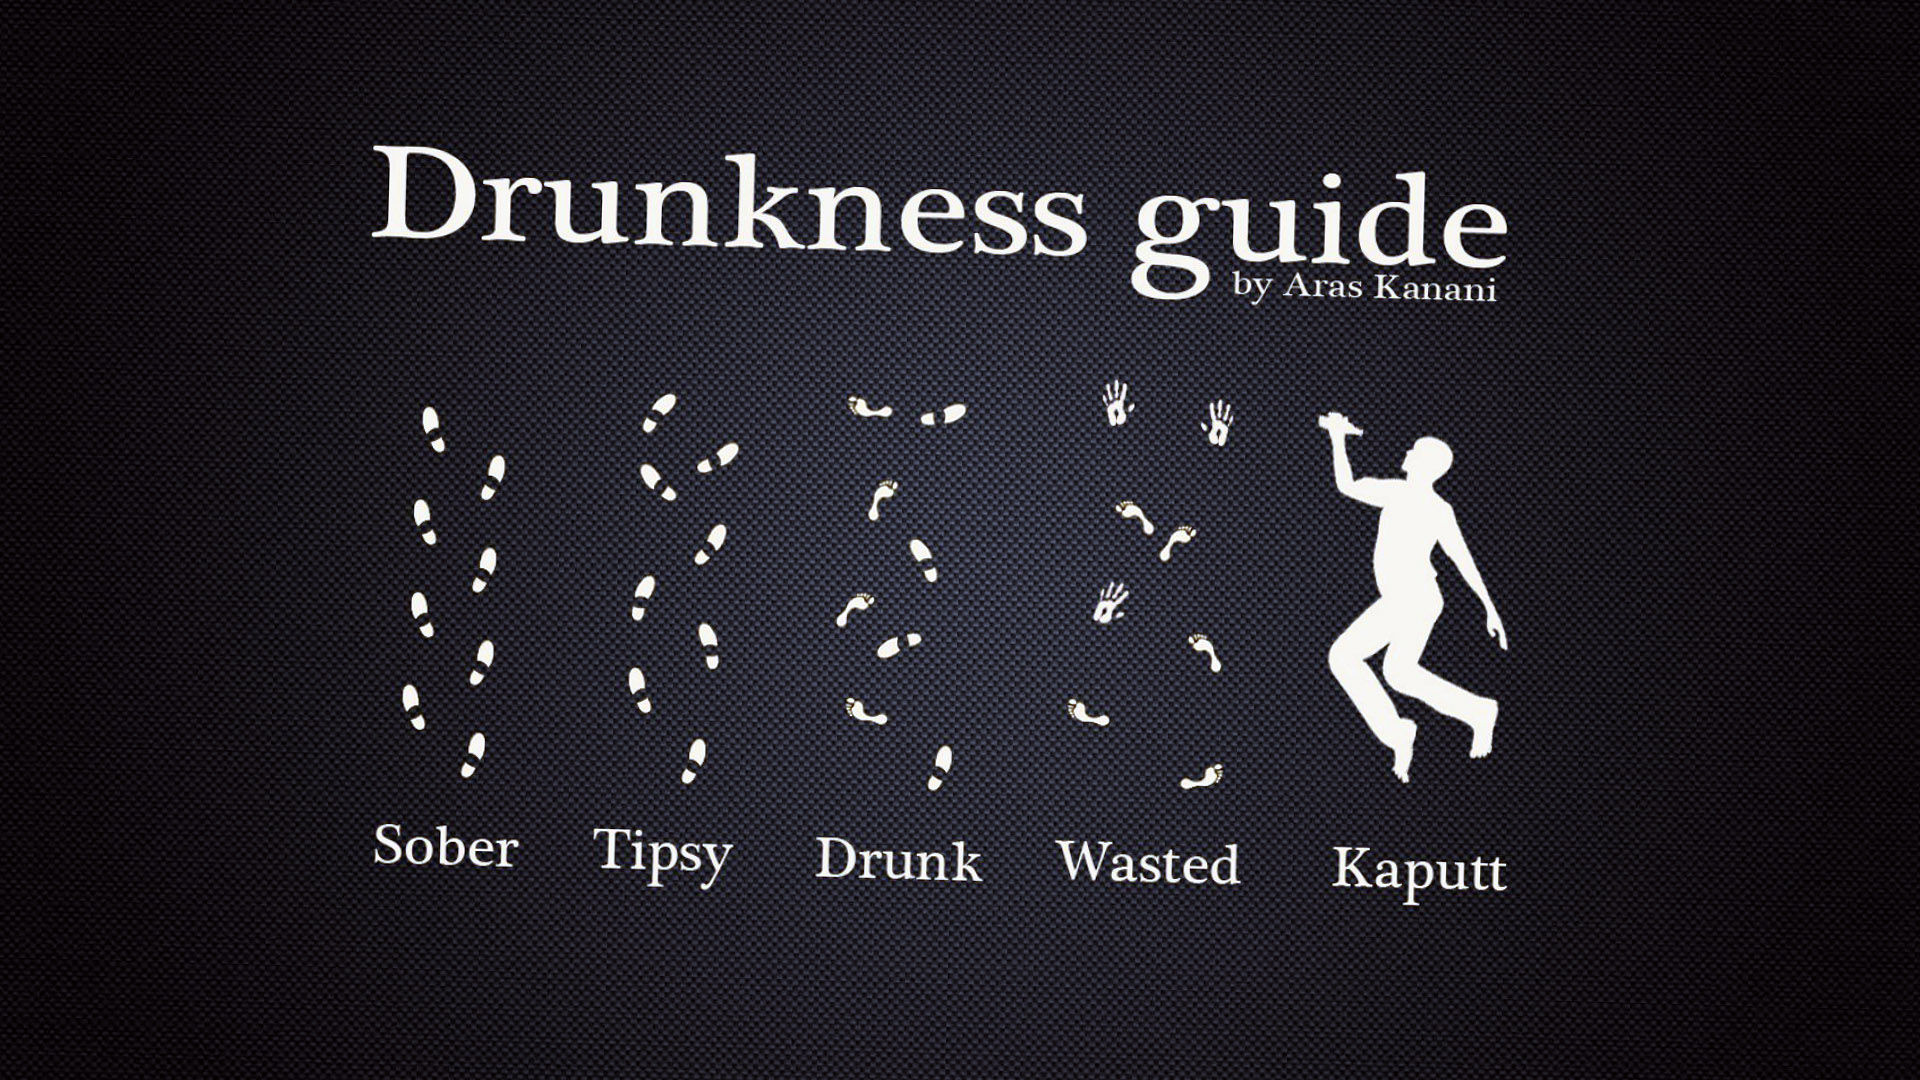 Drunkness Funny Quotes Wallpapers HD / Desktop and Mobile Backgrounds1920 x 1080